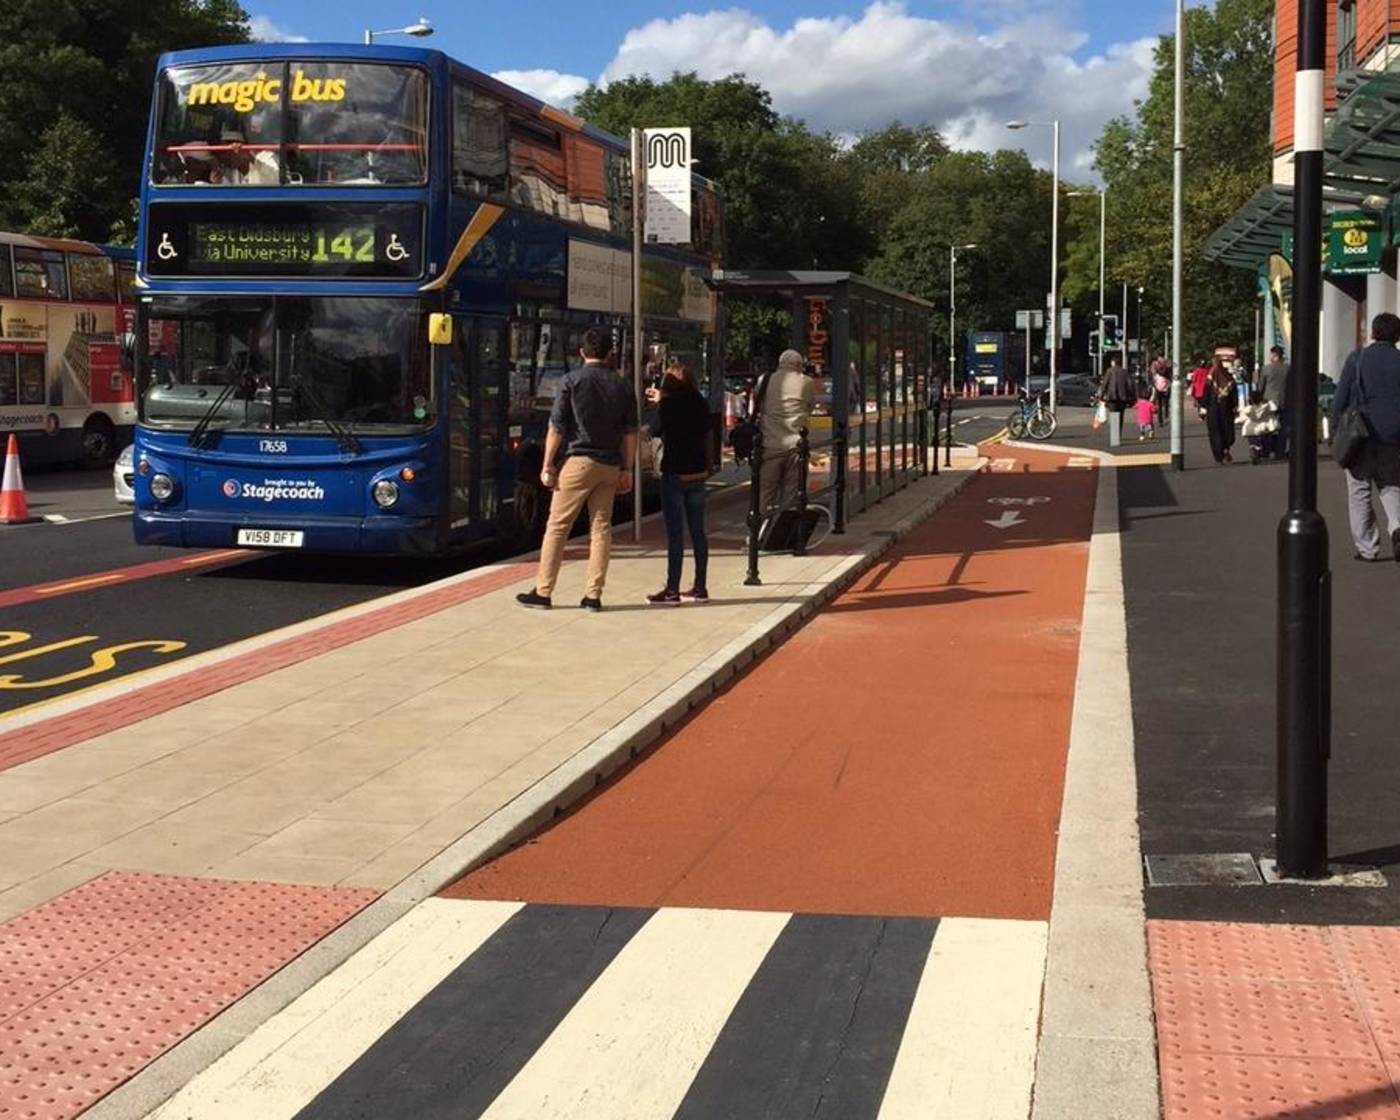 An image showing a bus stop bypass with passengers waiting to get on a bus